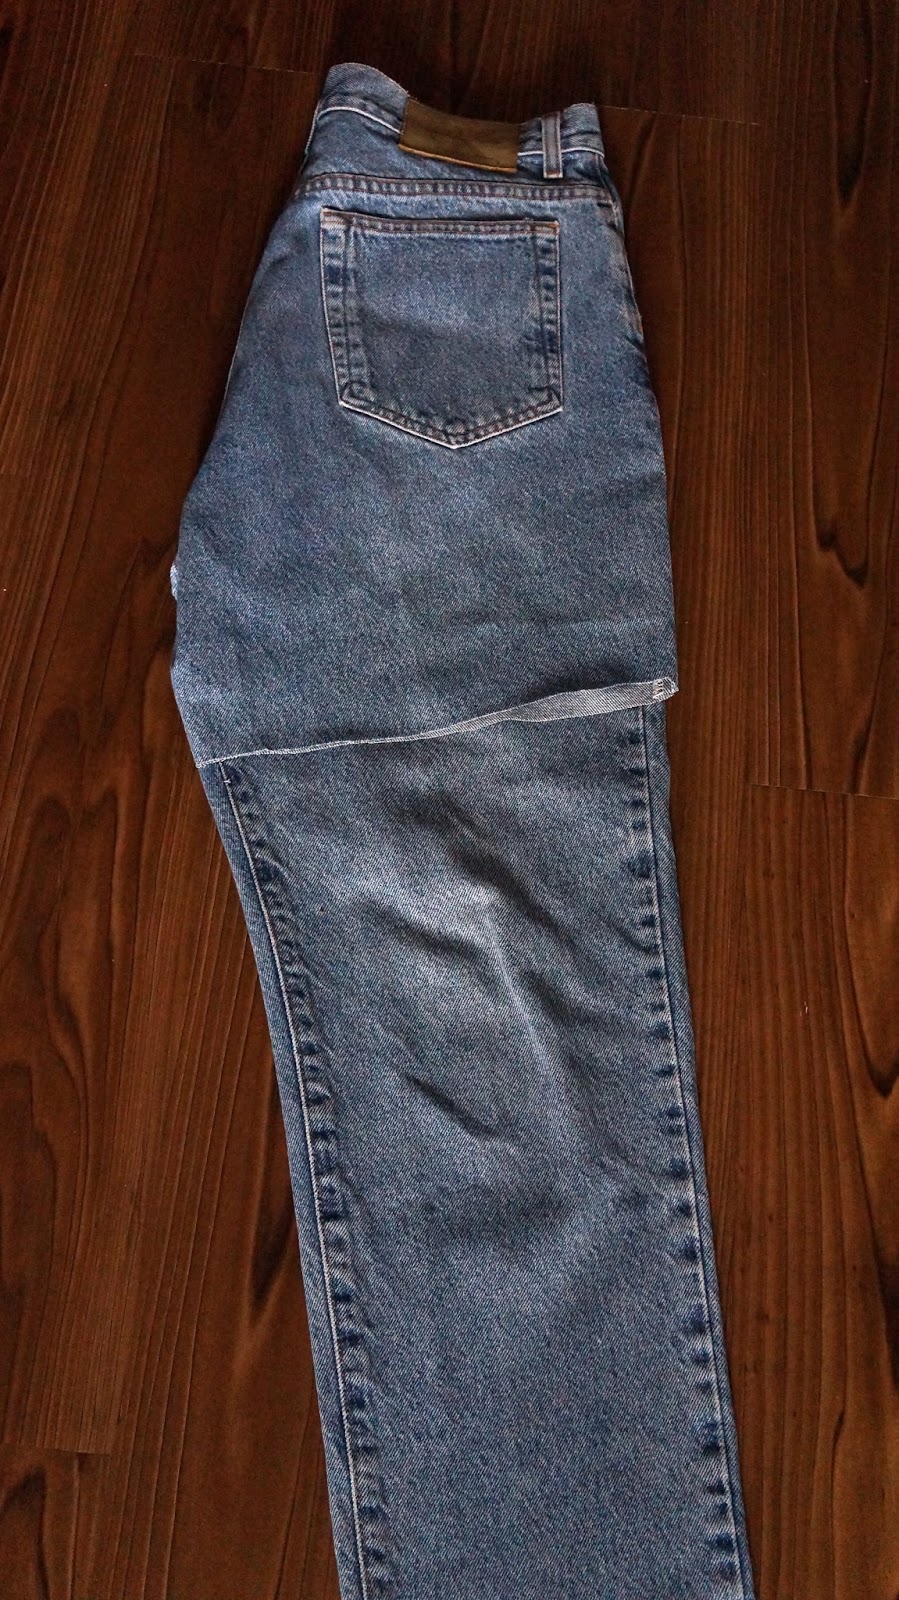 Bayshore & Central: DIY: Jeans to Jorts Transformation